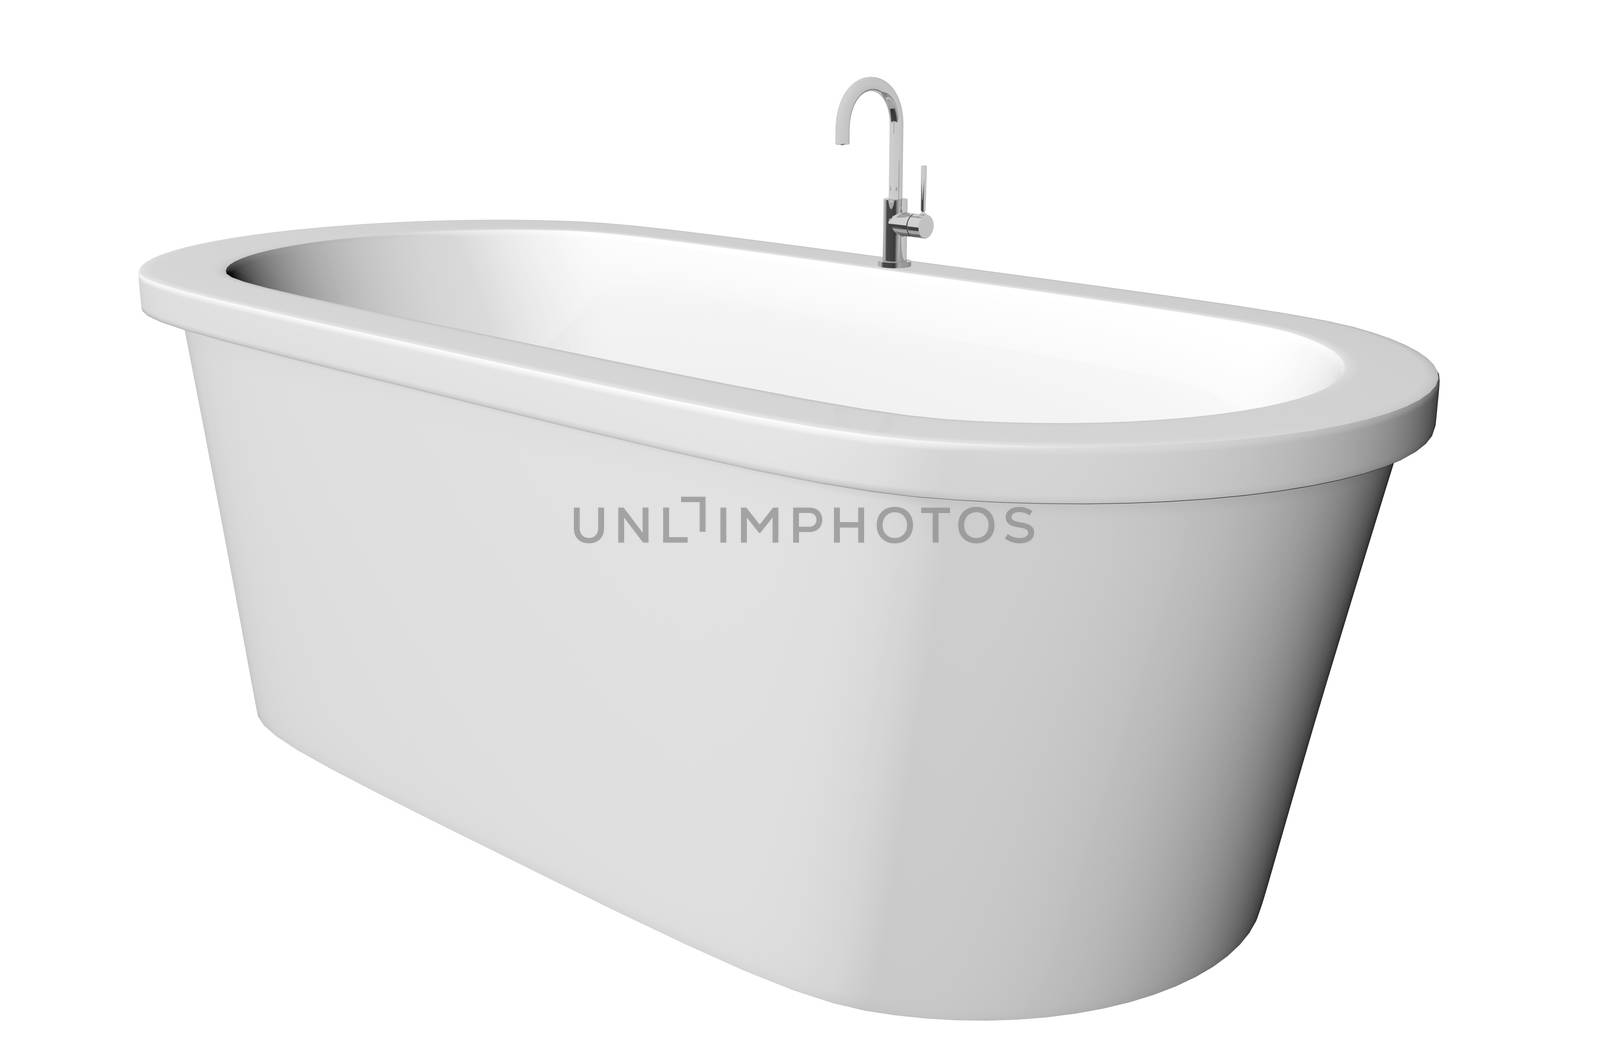 White and deep modern white bathtub with stainless steel fixtures, isolated against a white background by Morphart